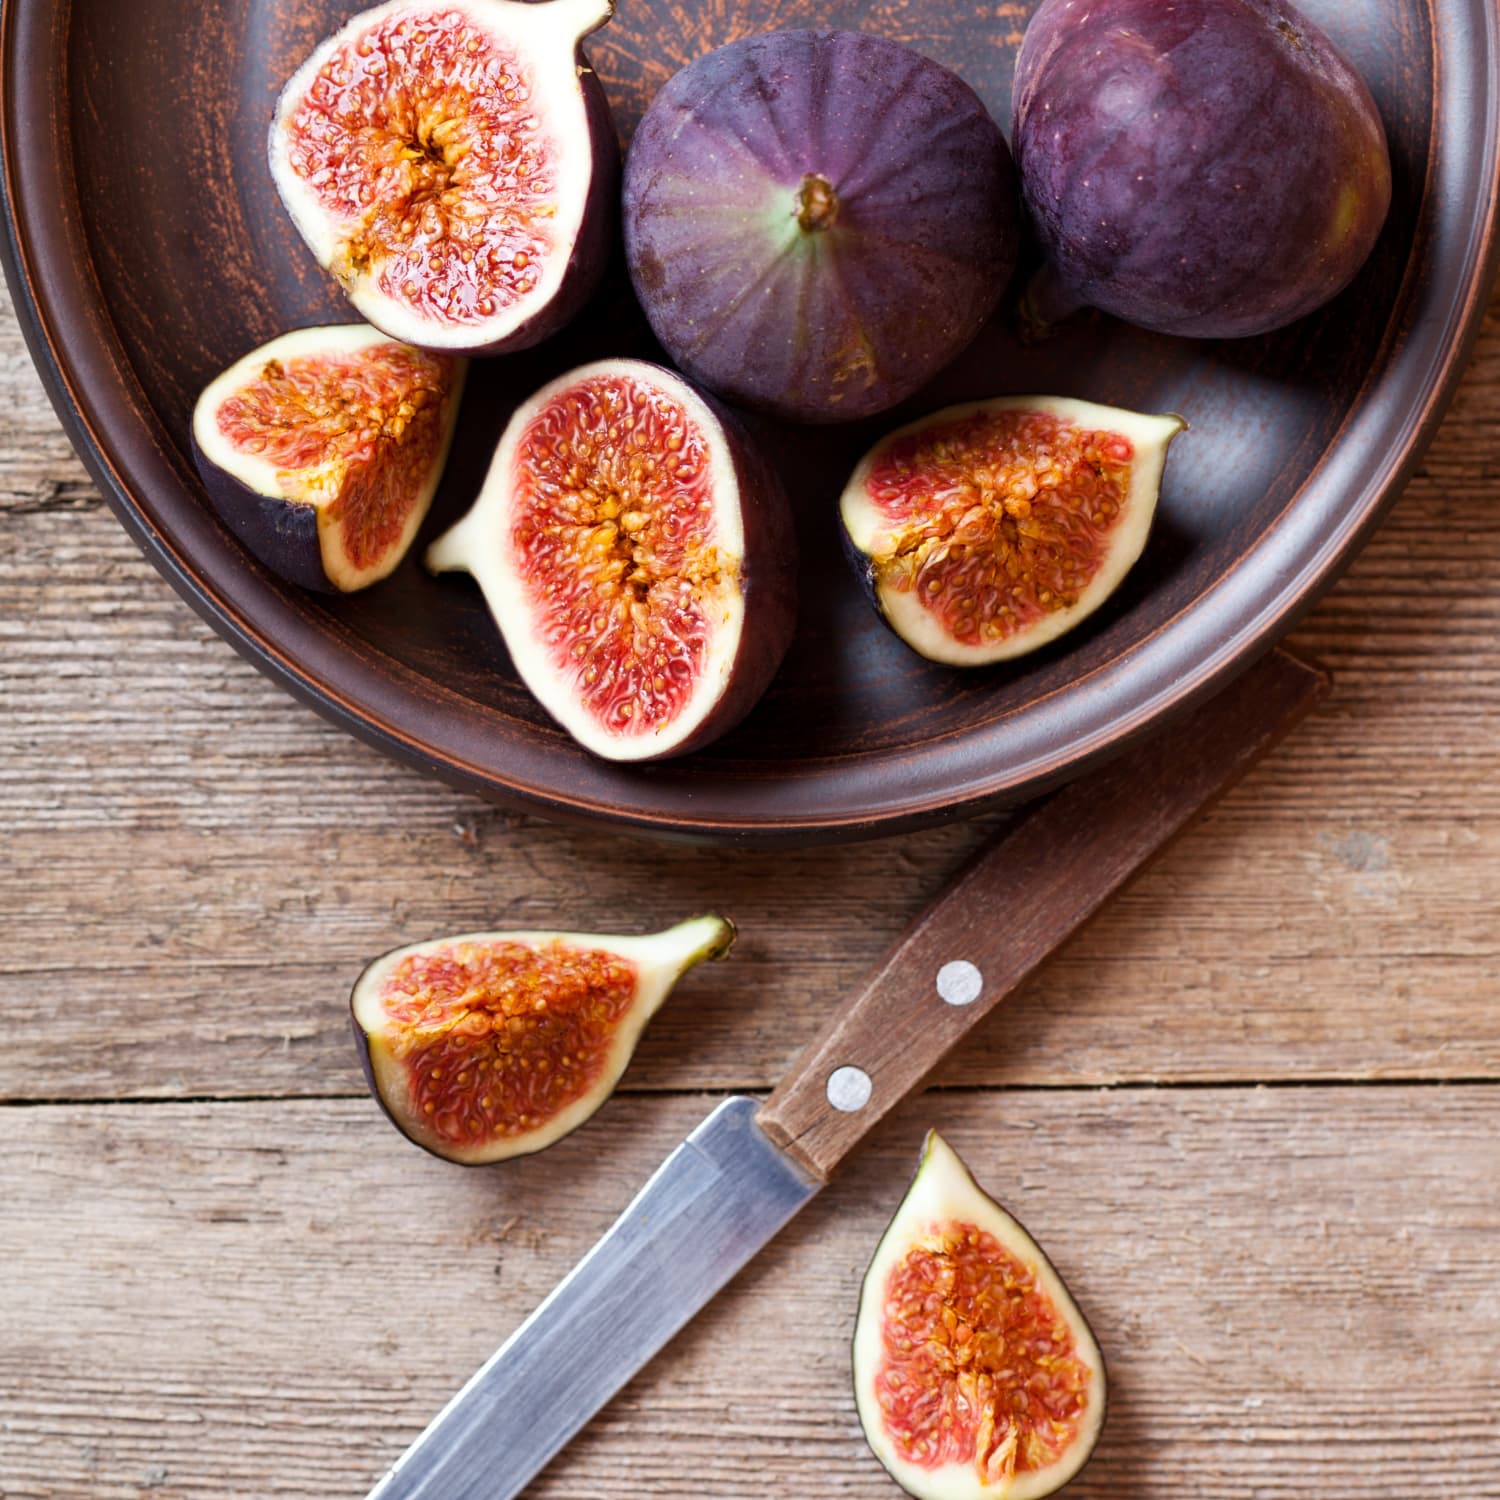 Everything You Need To Know About Figs Kitchn,Caramel Macchiato Starbucks Calories